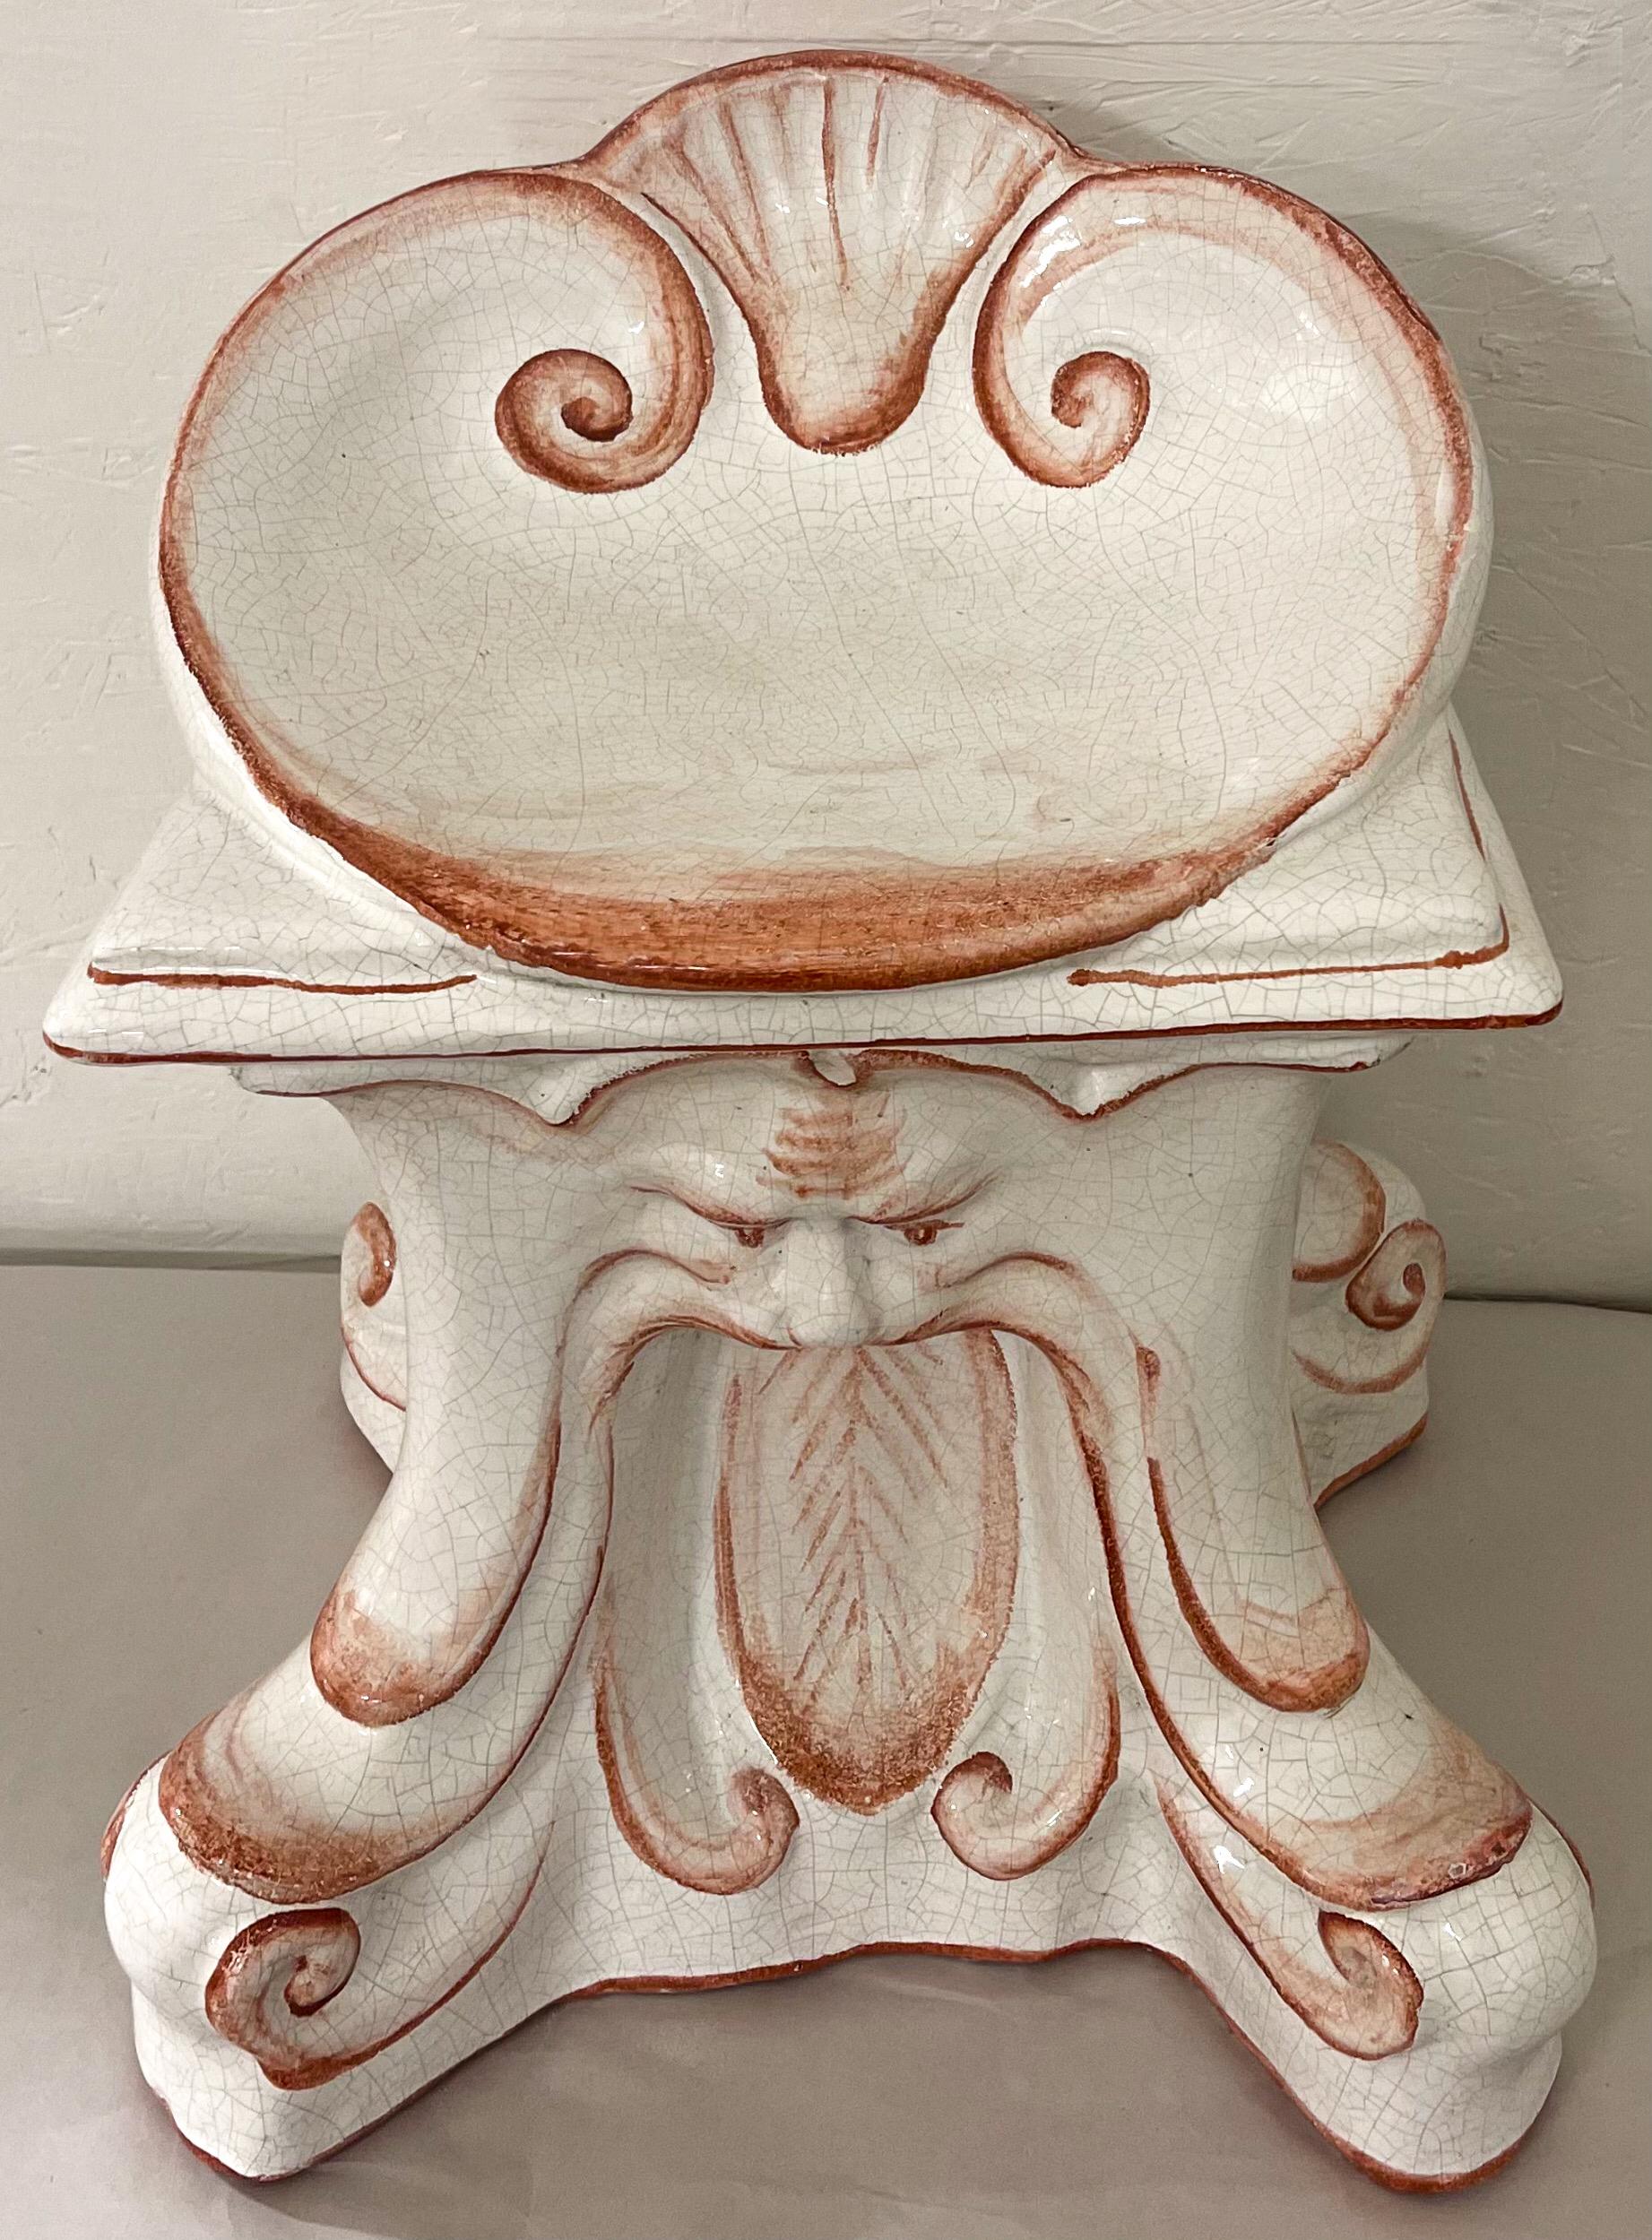 This is a wonderful Italian garden seat. It is terracotta with a North Wind and shell motif. Note the chair form as opposed to the traditional stool or barrel style. Lovely color and detail.